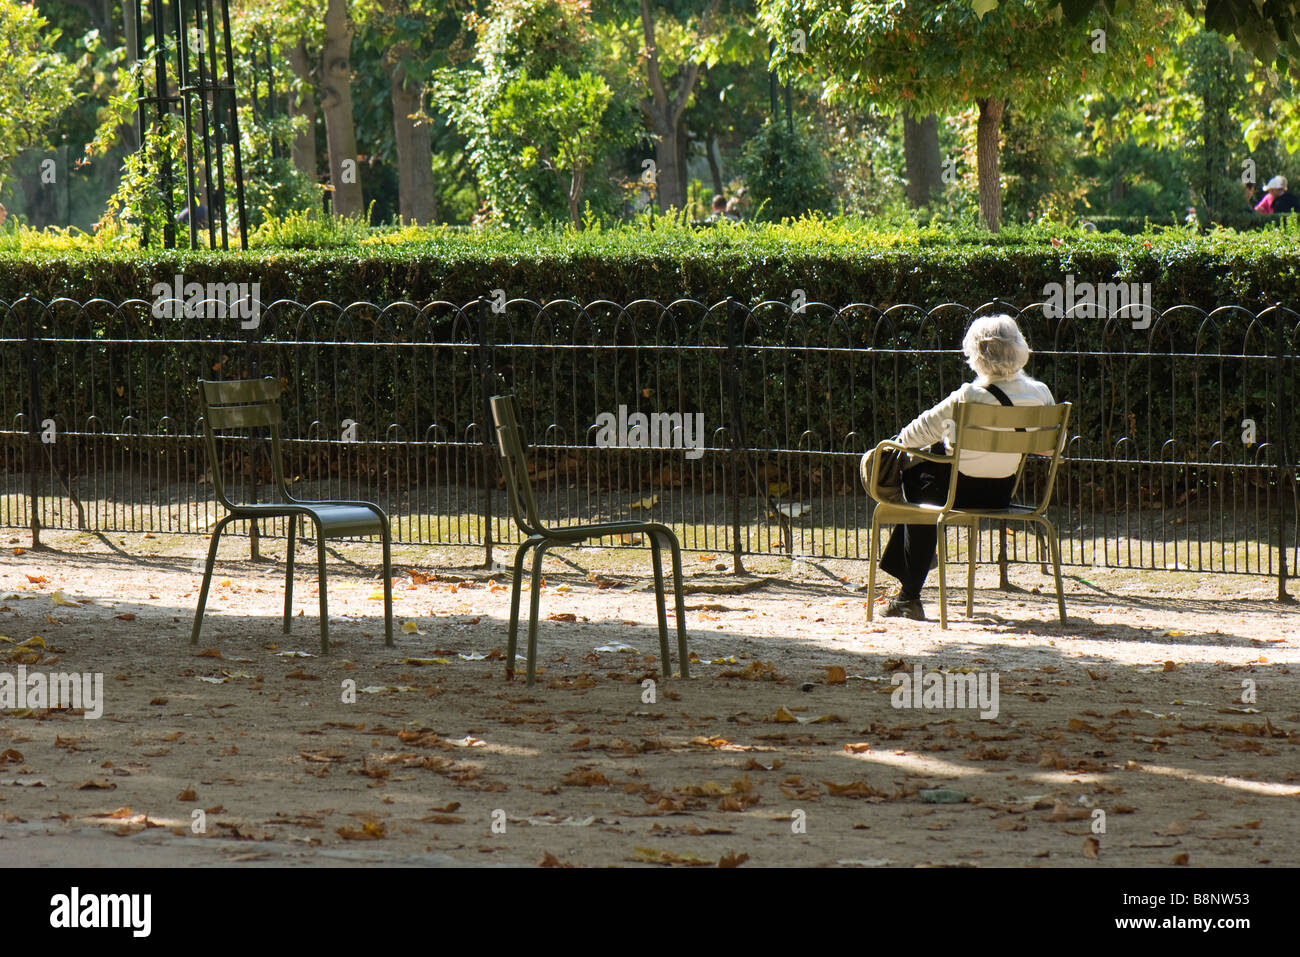 France, Paris, woman sitting alone in park, rear view Stock Photo